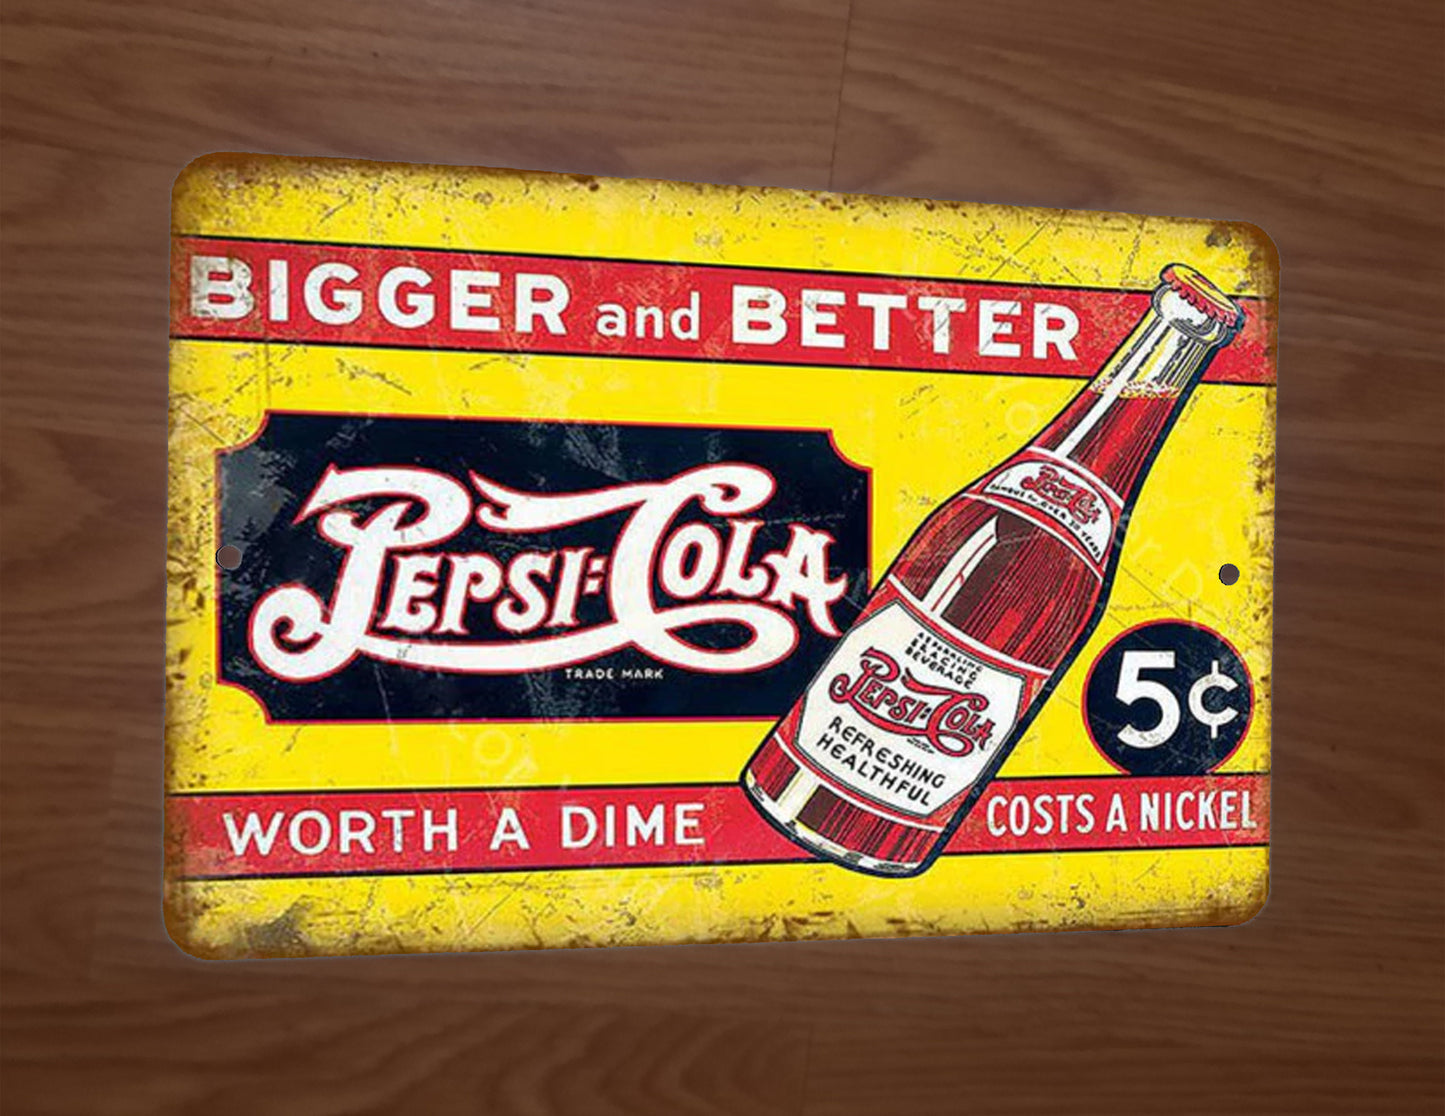 Bigger Better Pepsi Cola 5 cents Worth a Dime 8x12 Metal Wall Sign Garage Poster